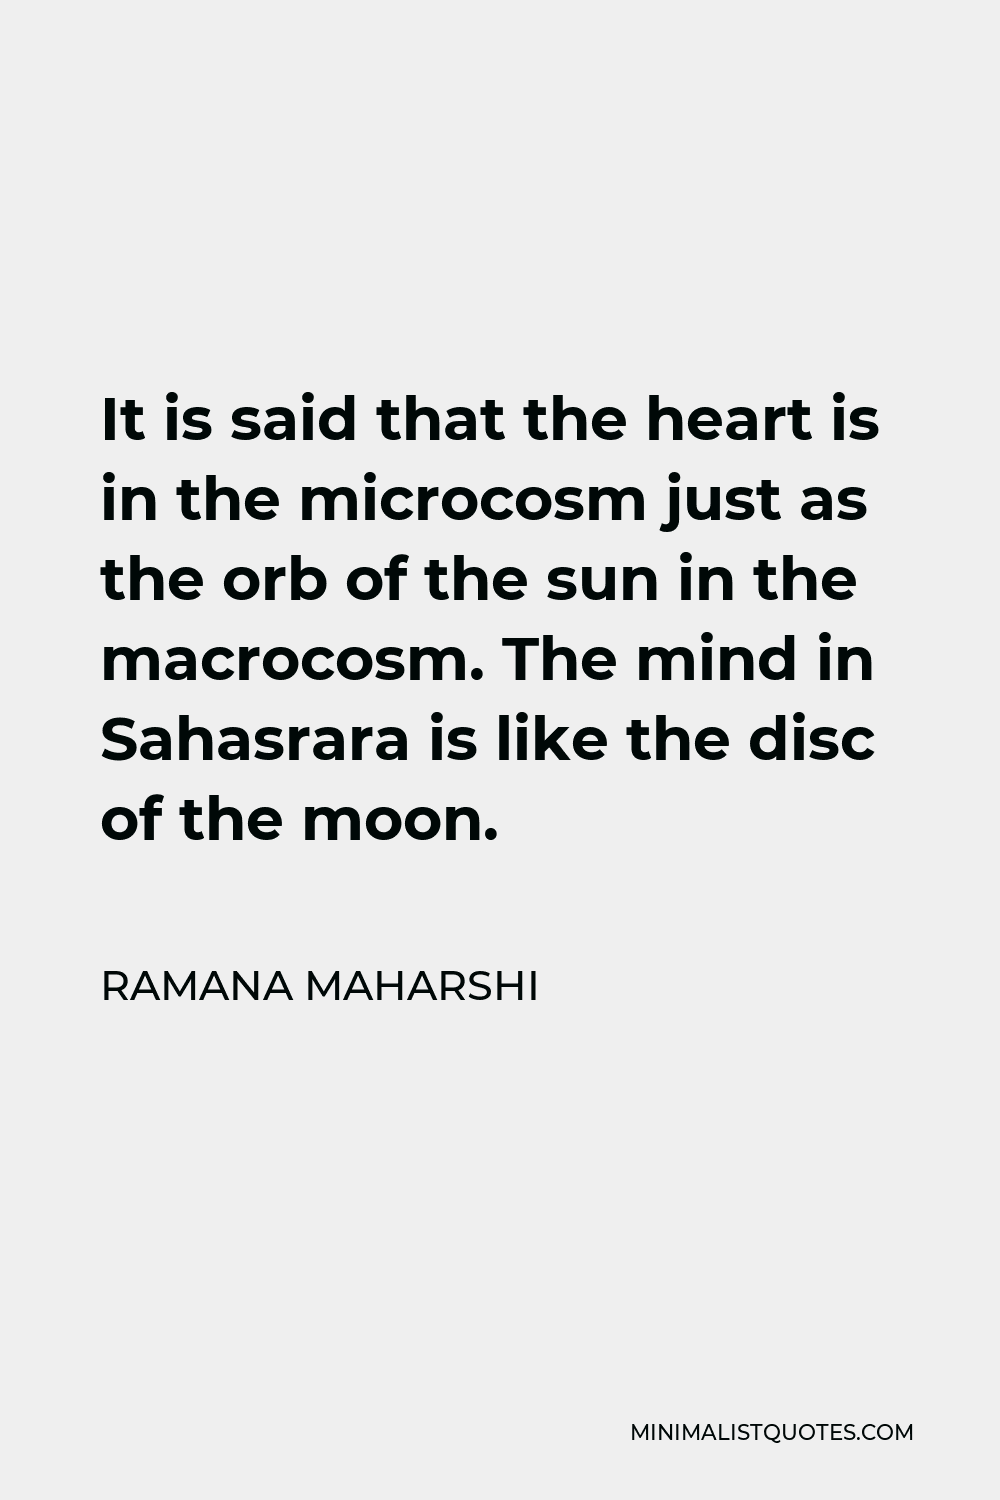 Ramana Maharshi Quote - It is said that the heart is in the microcosm just as the orb of the sun in the macrocosm. The mind in Sahasrara is like the disc of the moon.